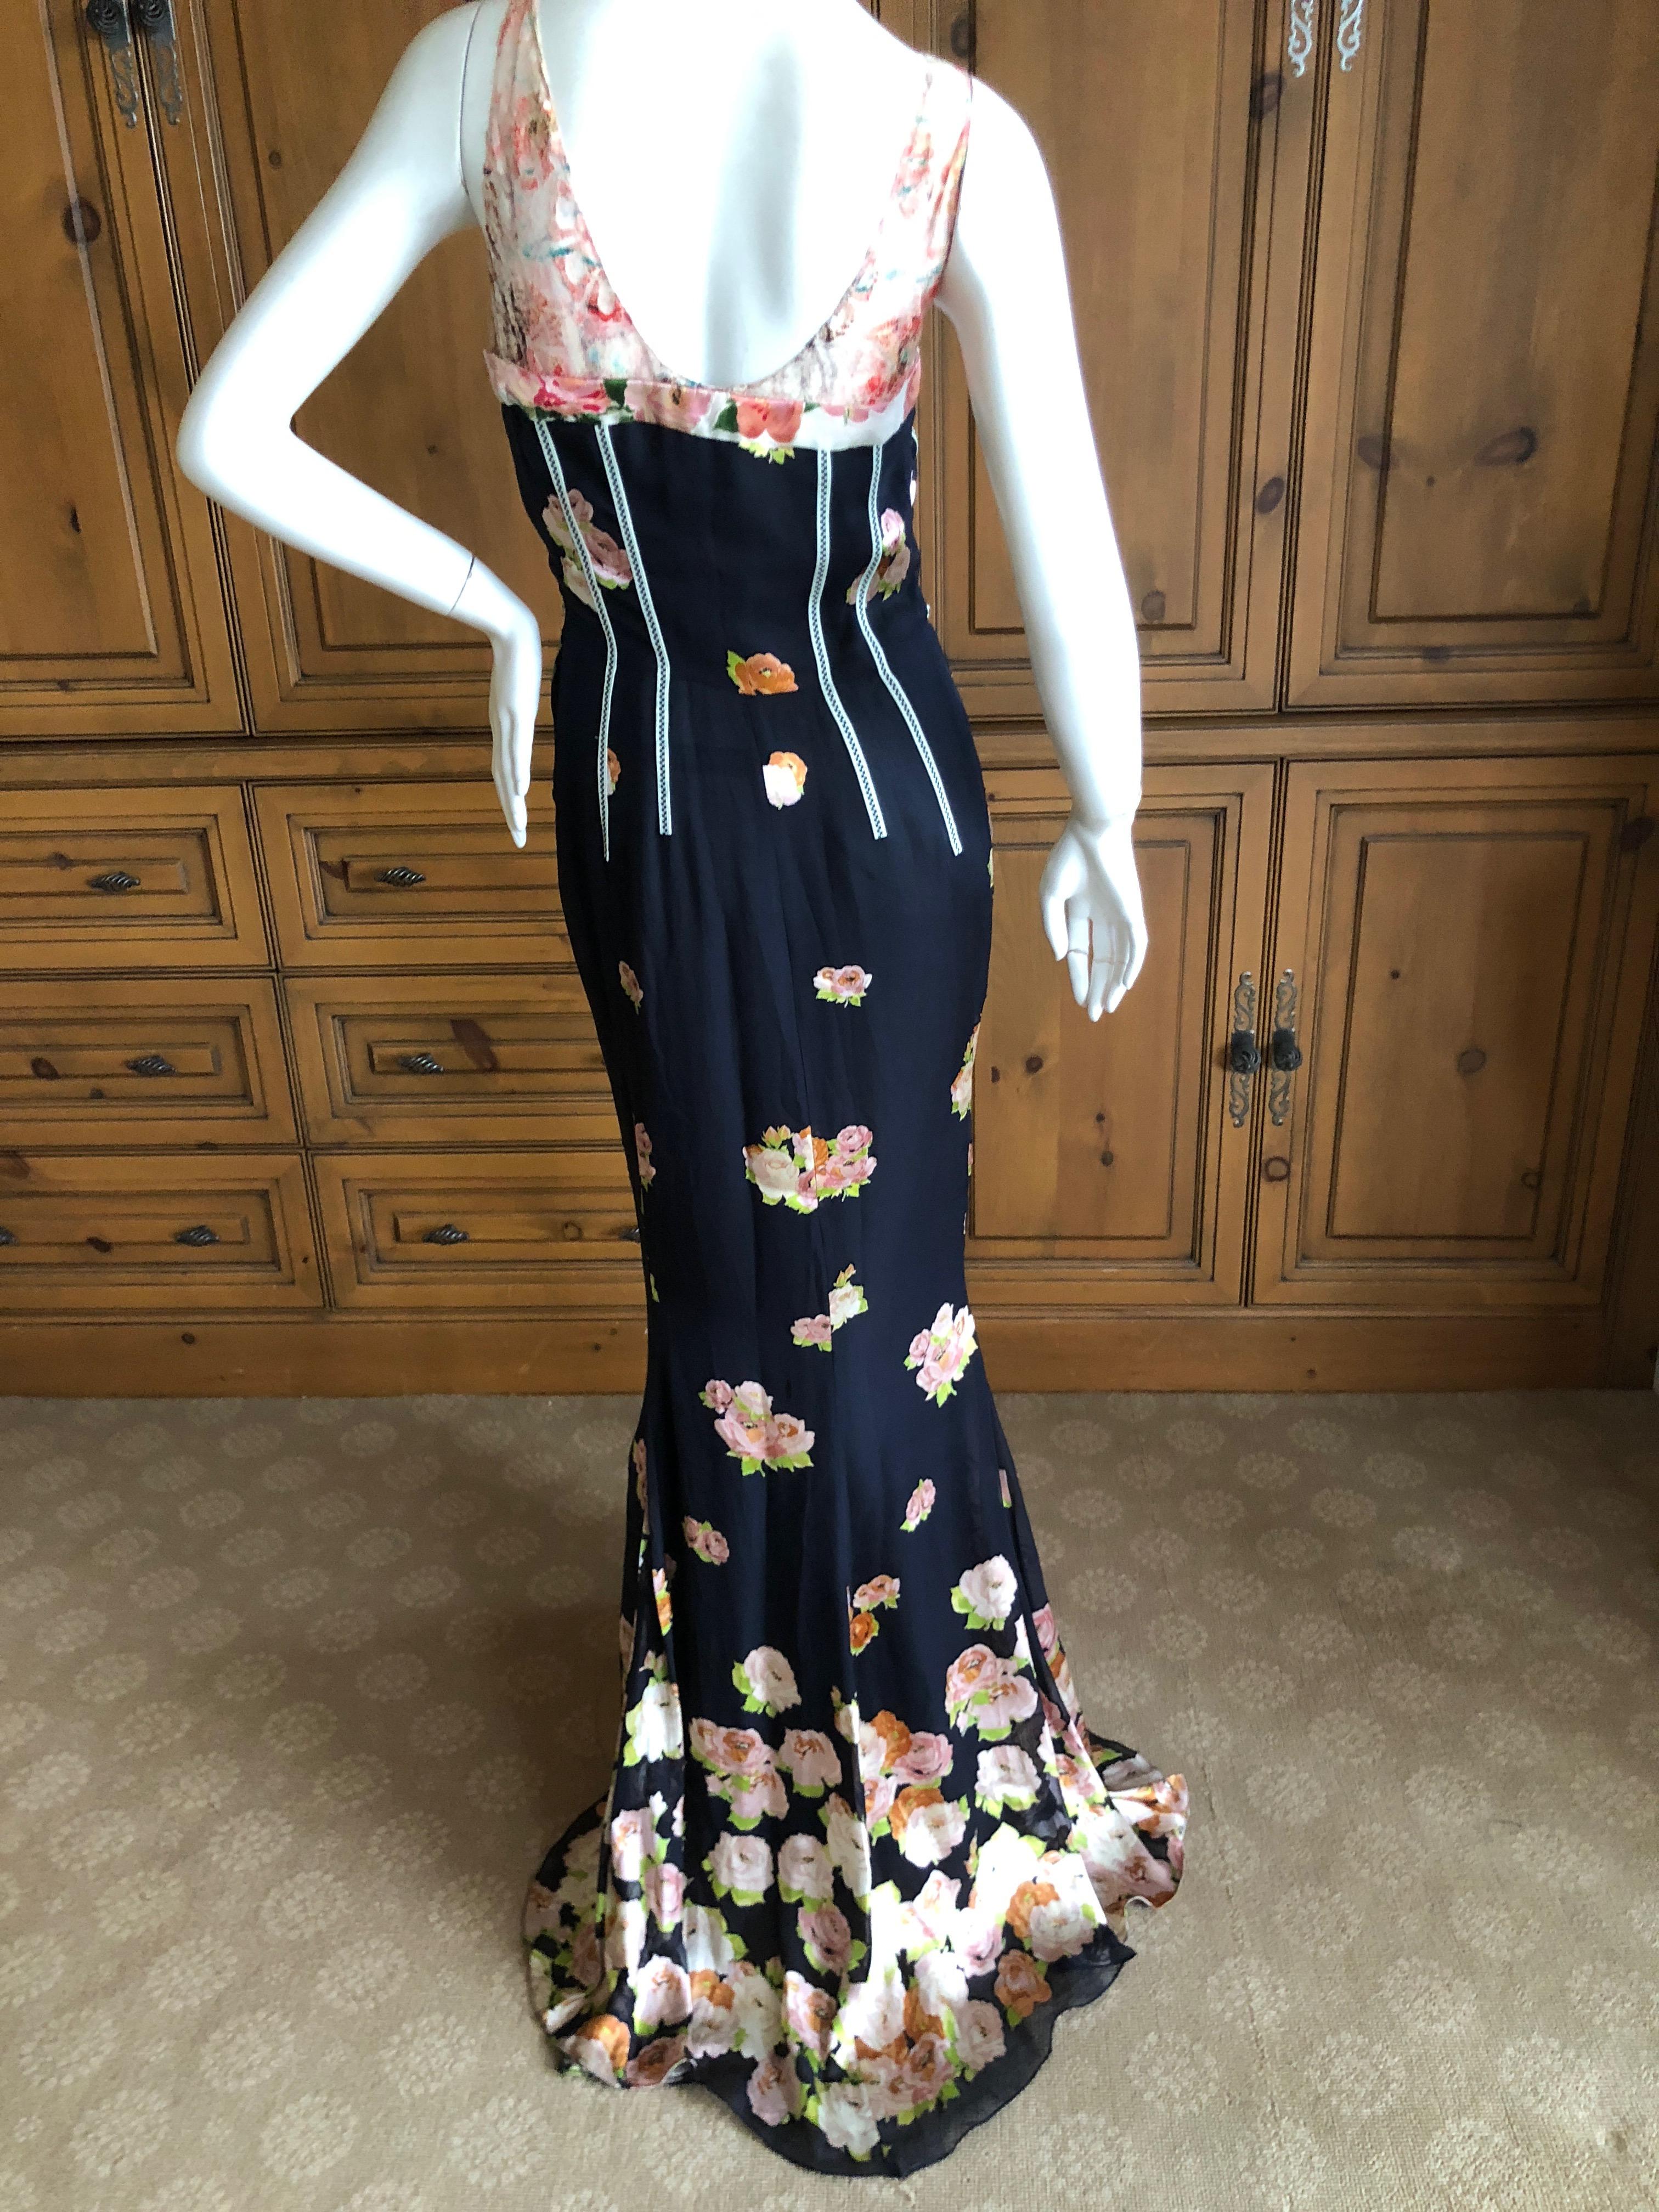 Christian Lacroix Vintage Evening Dress for Neiman Marcus
 NWT $3700 Size 38
This is so much prettier in person, the photos don't d it justice
Size 38
Bust 34